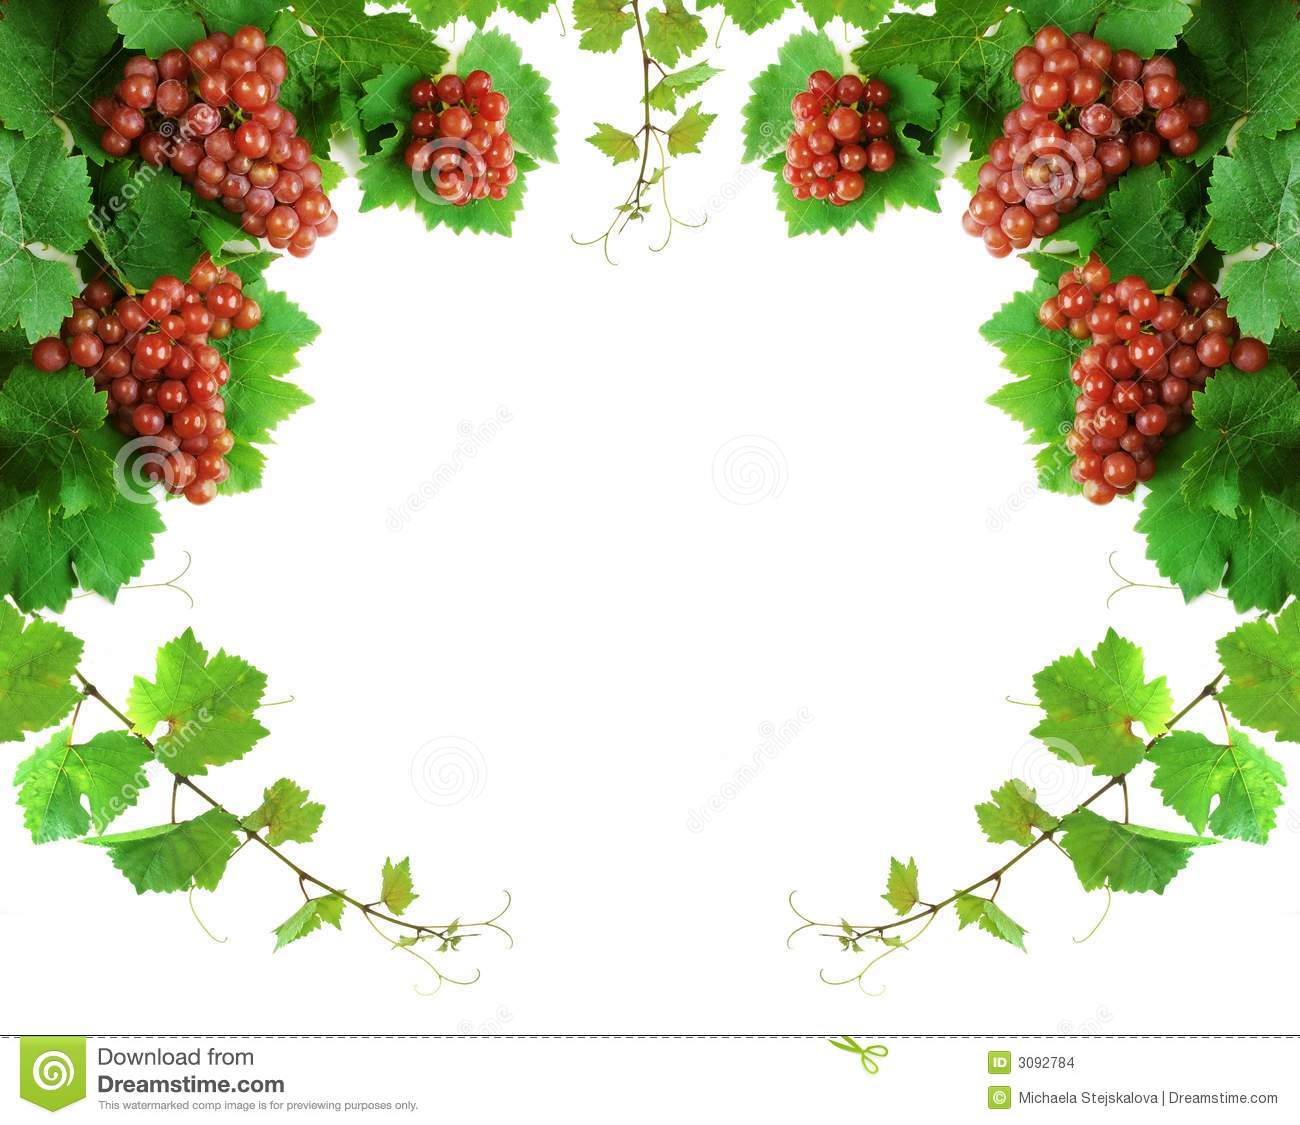 Wine Grape Clusters With Leaves And Sprouts  Isolated On White